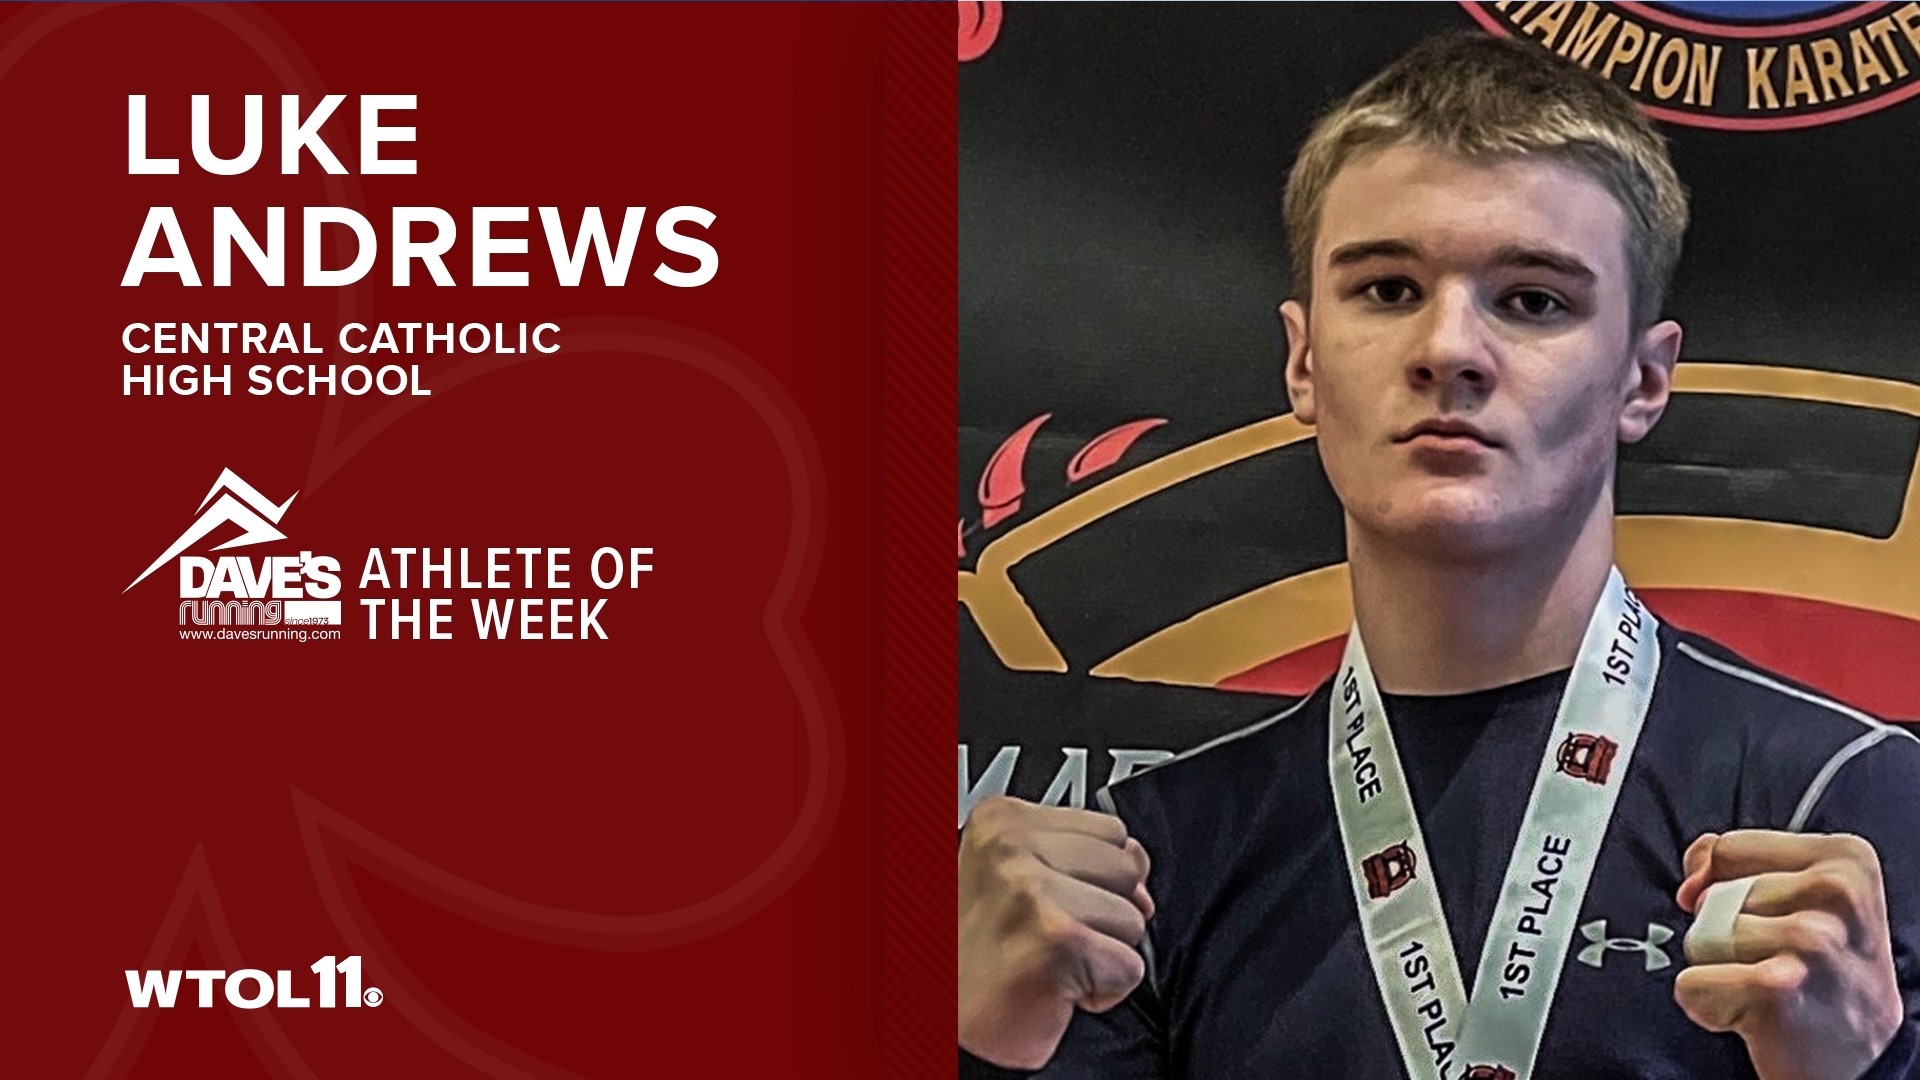 Andrews became Central Catholic's first gold medalist for the martial arts club at the tournament of champions.